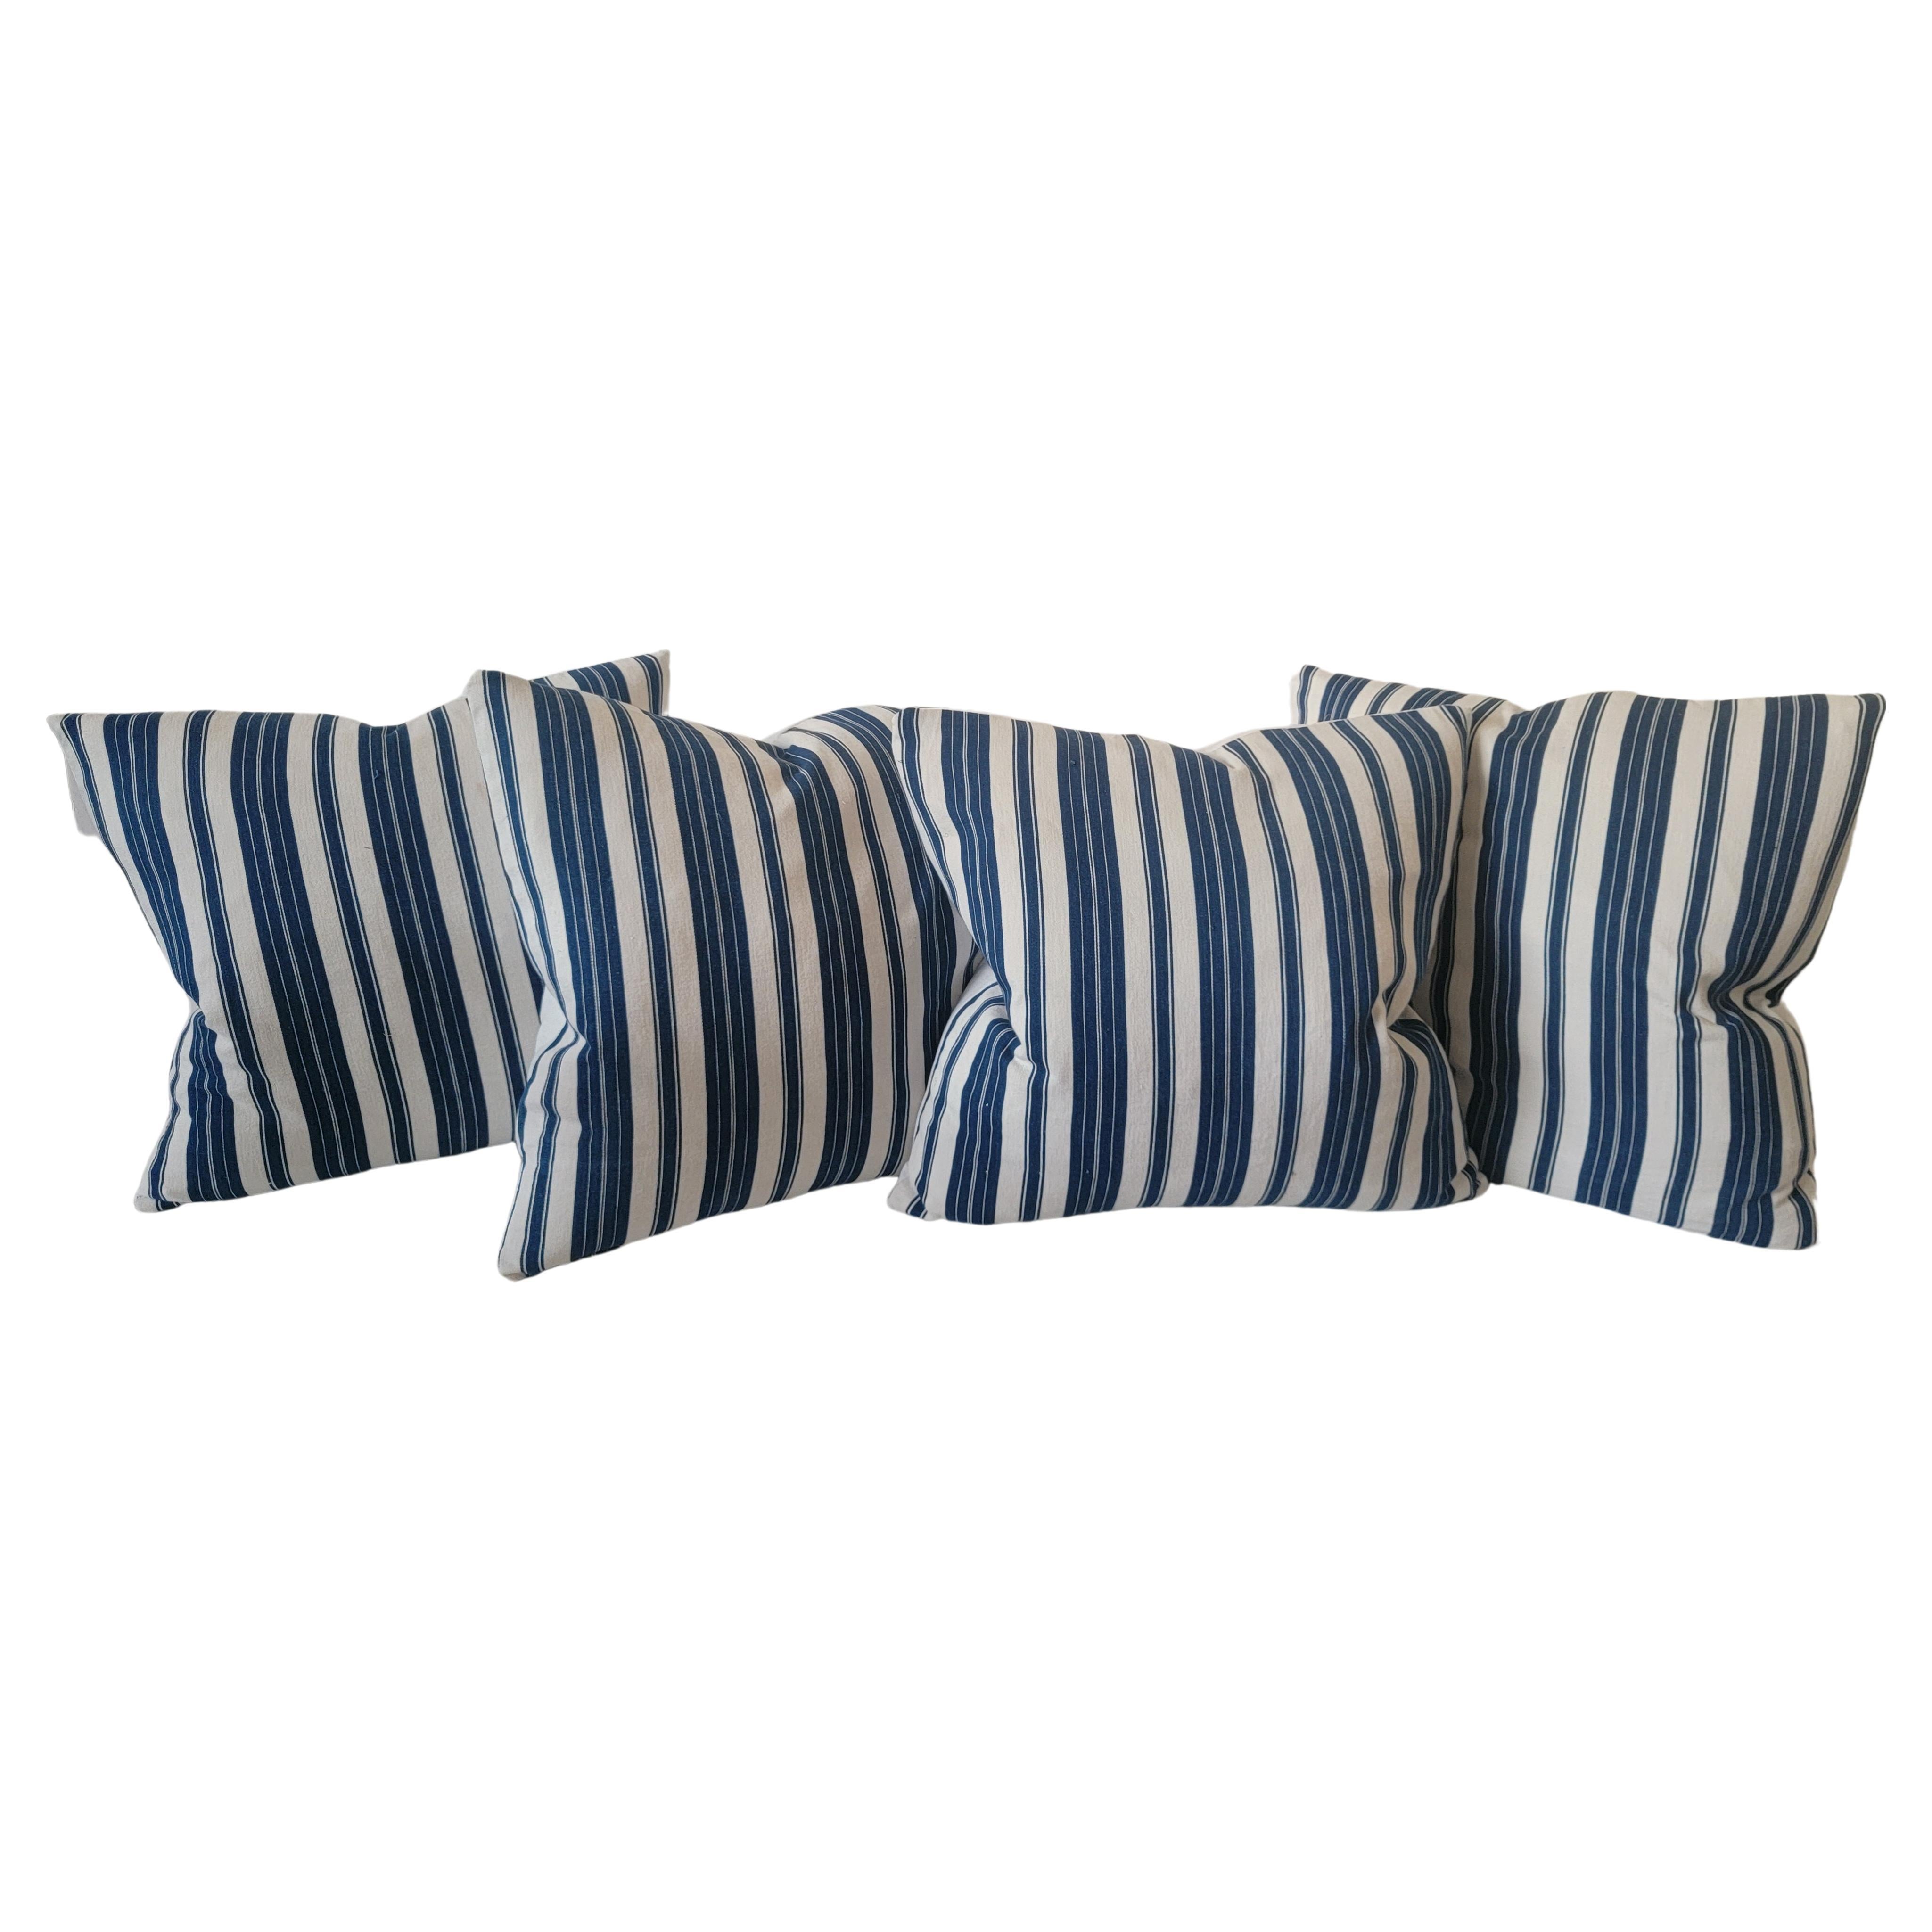 19thc Blue and White Striped Ticking Pillows For Sale